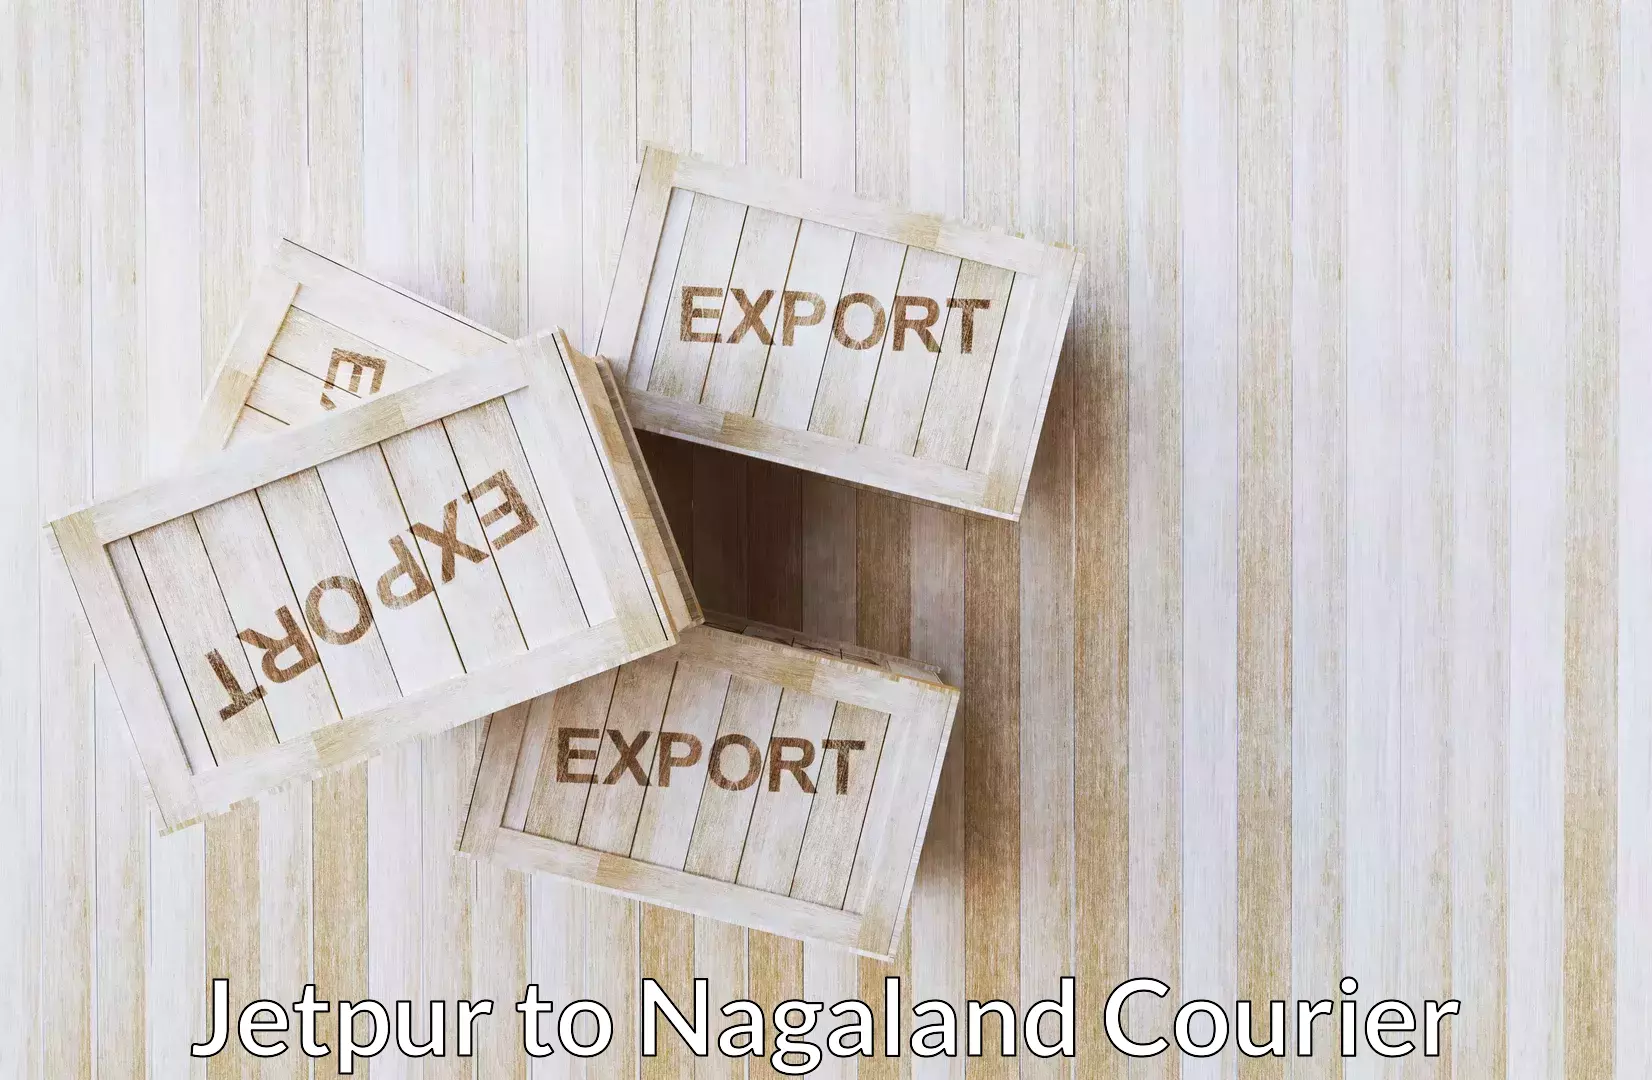 Luggage shipment processing in Jetpur to Nagaland